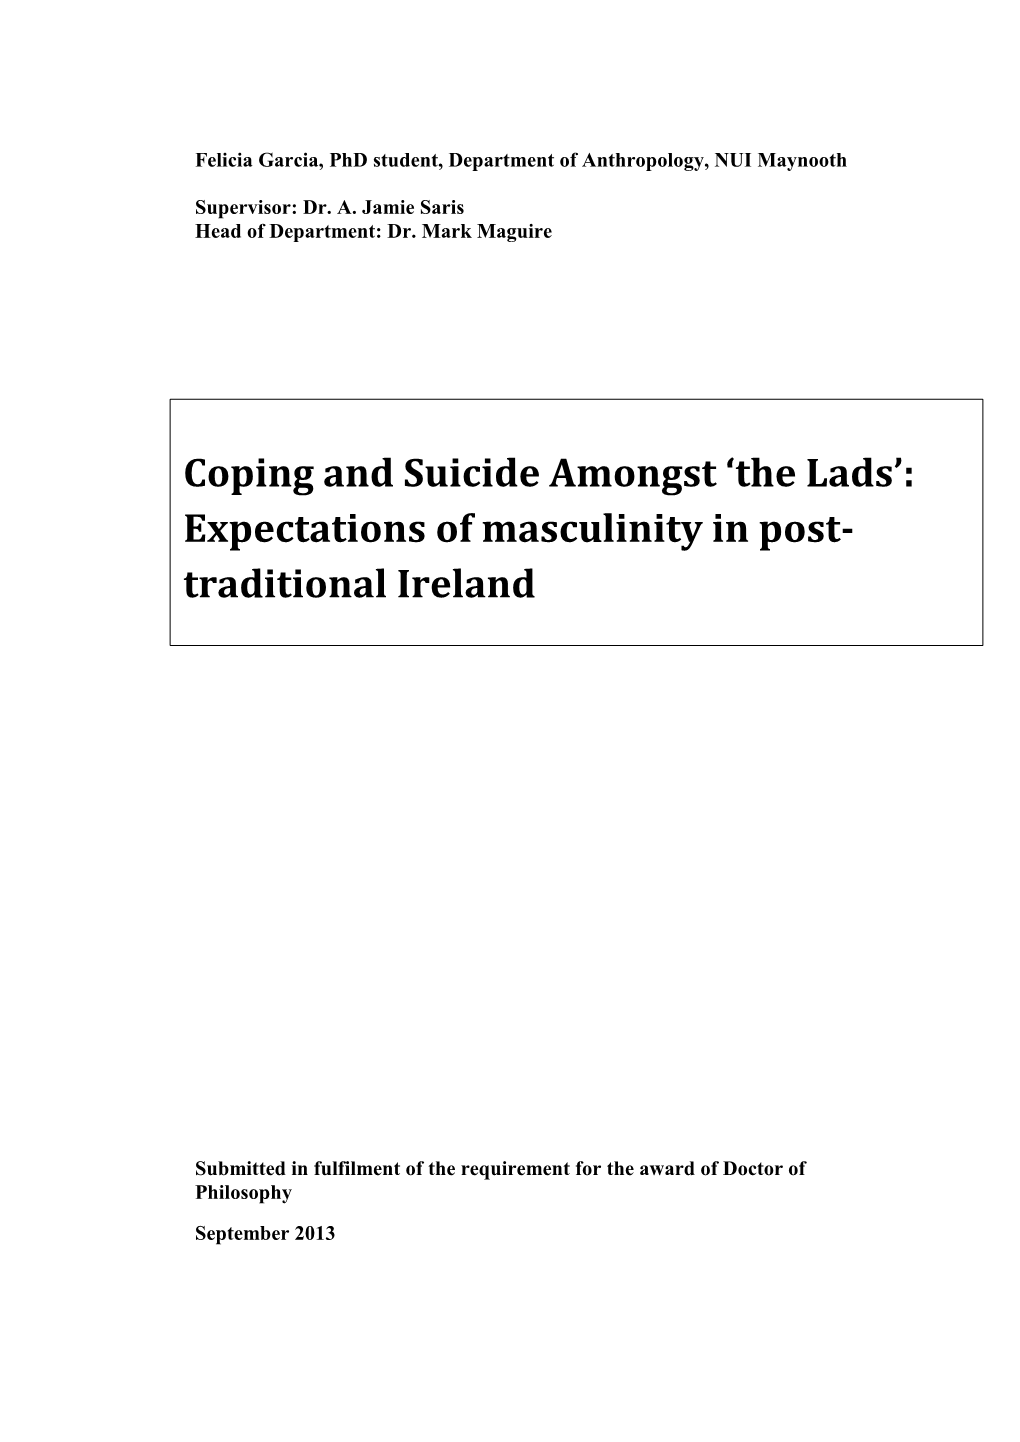 Coping and Suicide Amongst 'The Lads': Expectations of Masculinity In